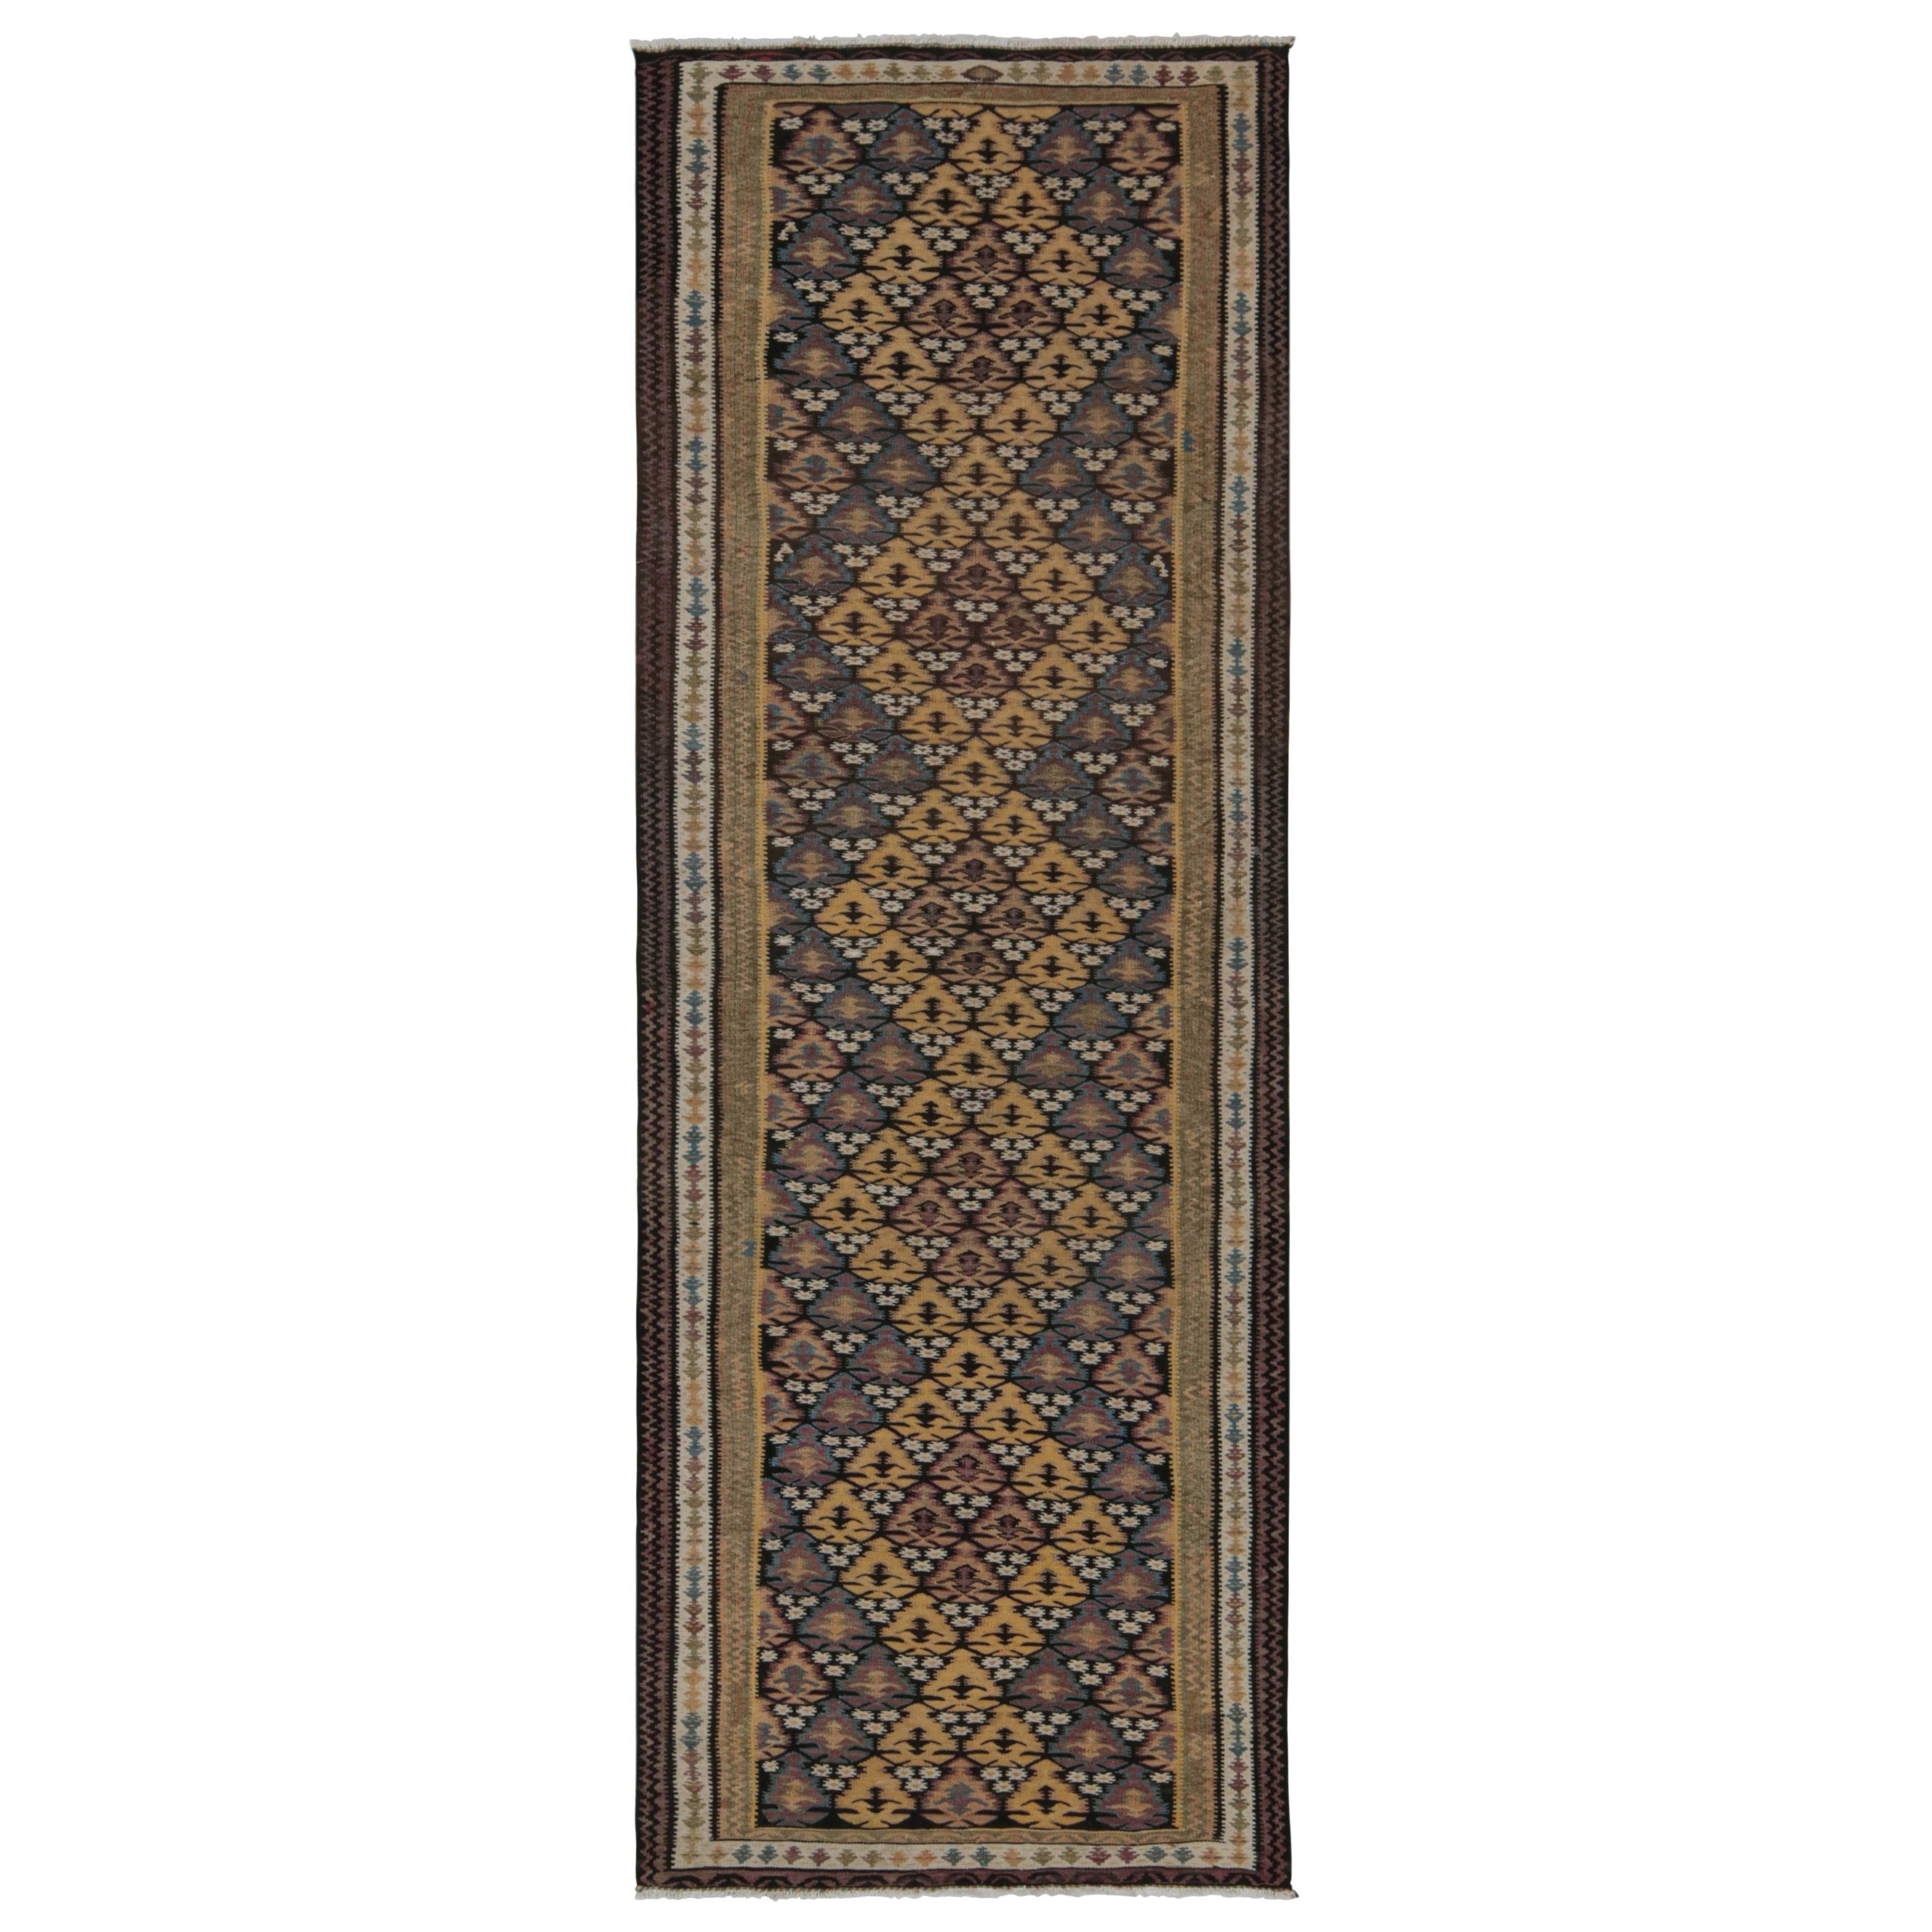 Vintage Persian Tribal Runner Rug, with Geometric Patterns, from Rug & Kilim